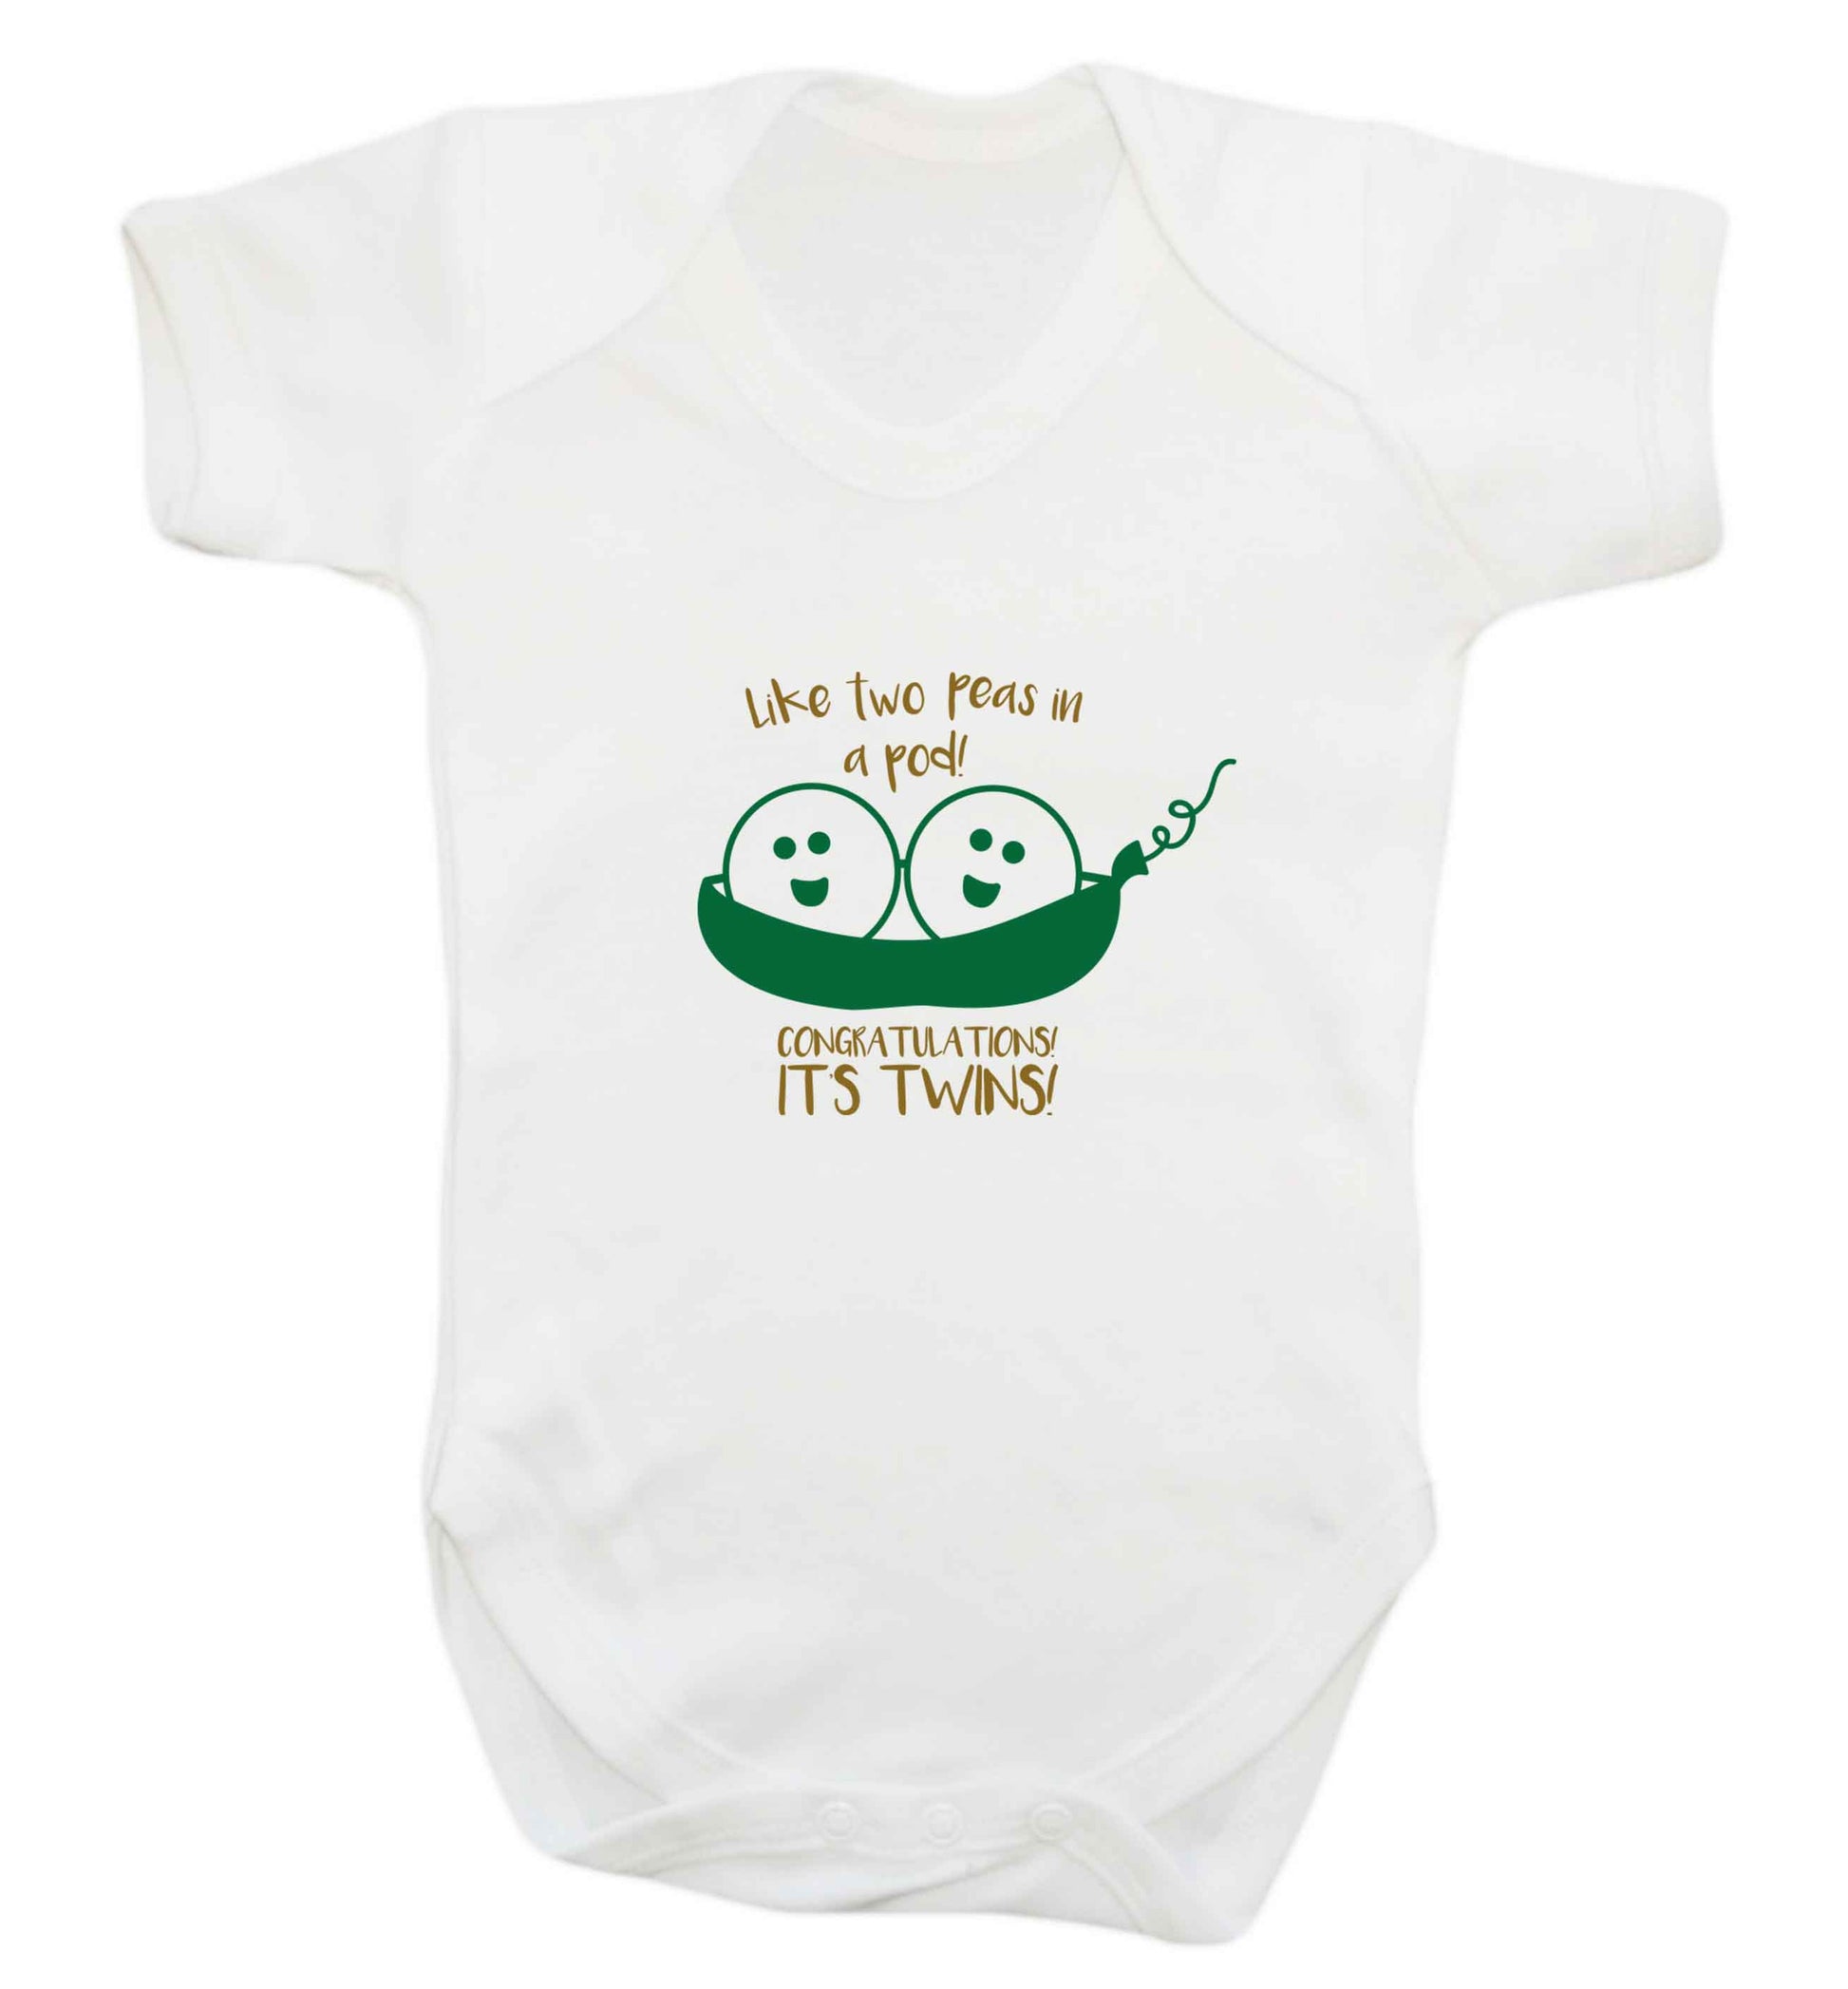 Like two peas in a pod! Congratulations it's twins! baby vest white 18-24 months